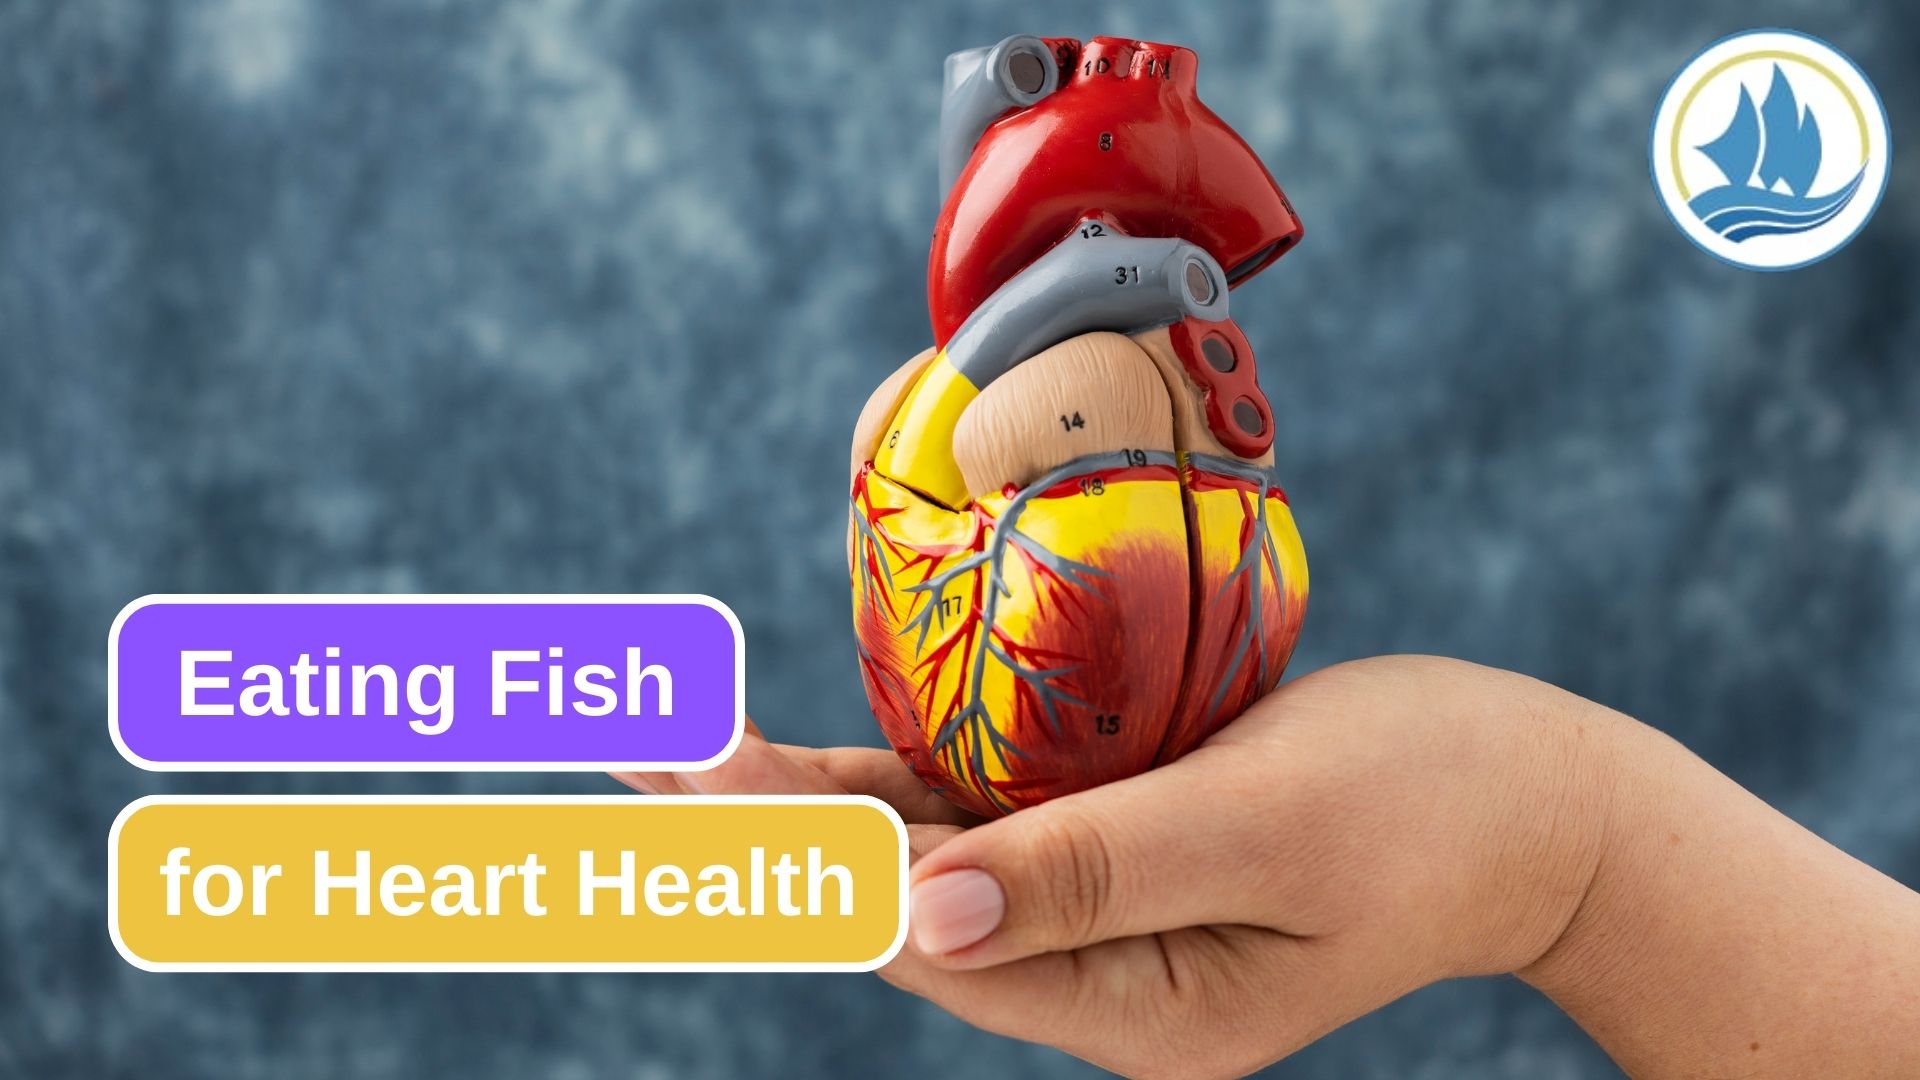 9 Reasons Why Eating Fish Is Good for Heart Health